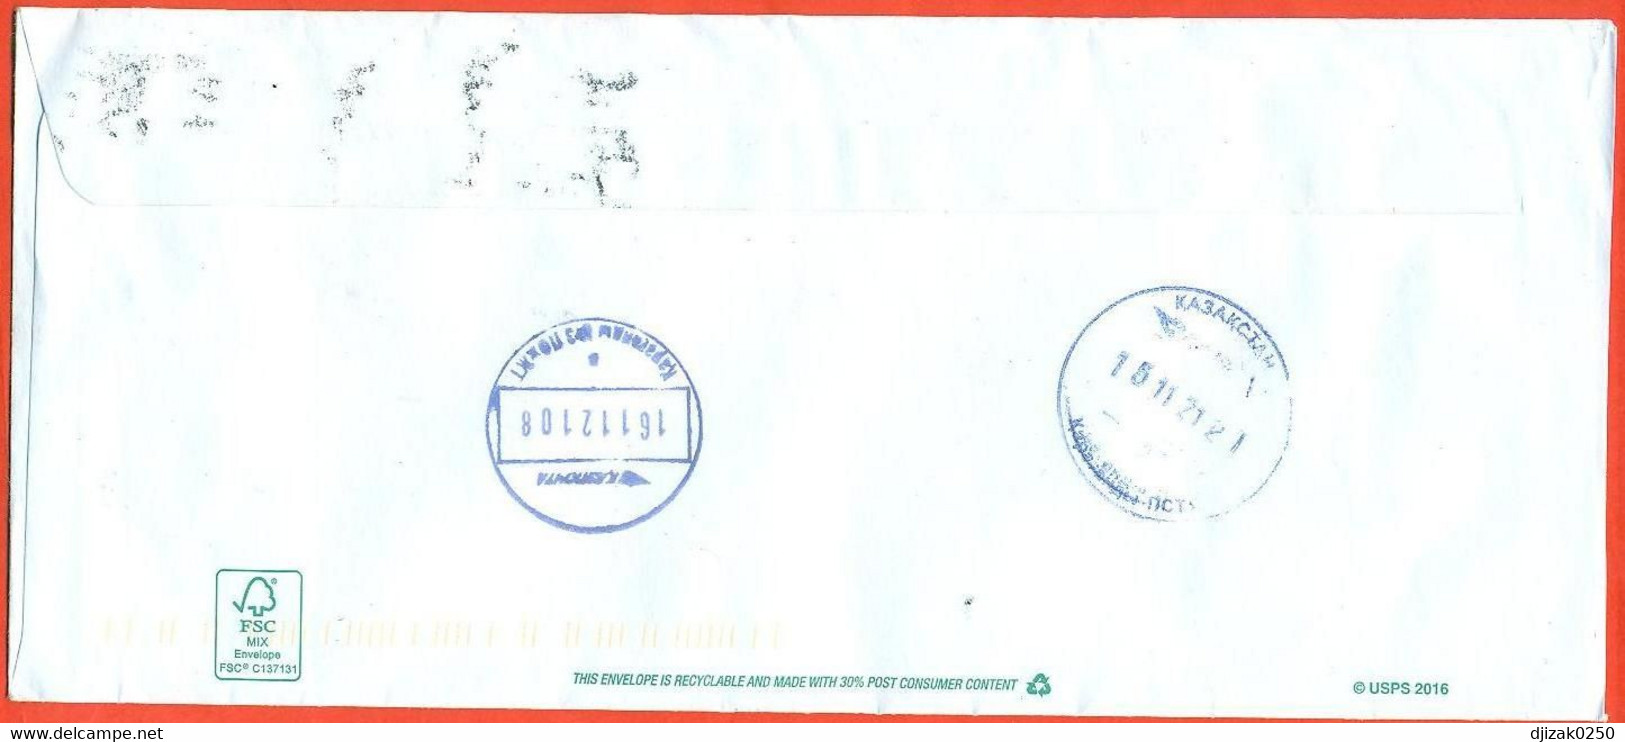 United States 2021. The Envelope  With Printed Stamp Passed Through The Mail. - Storia Postale